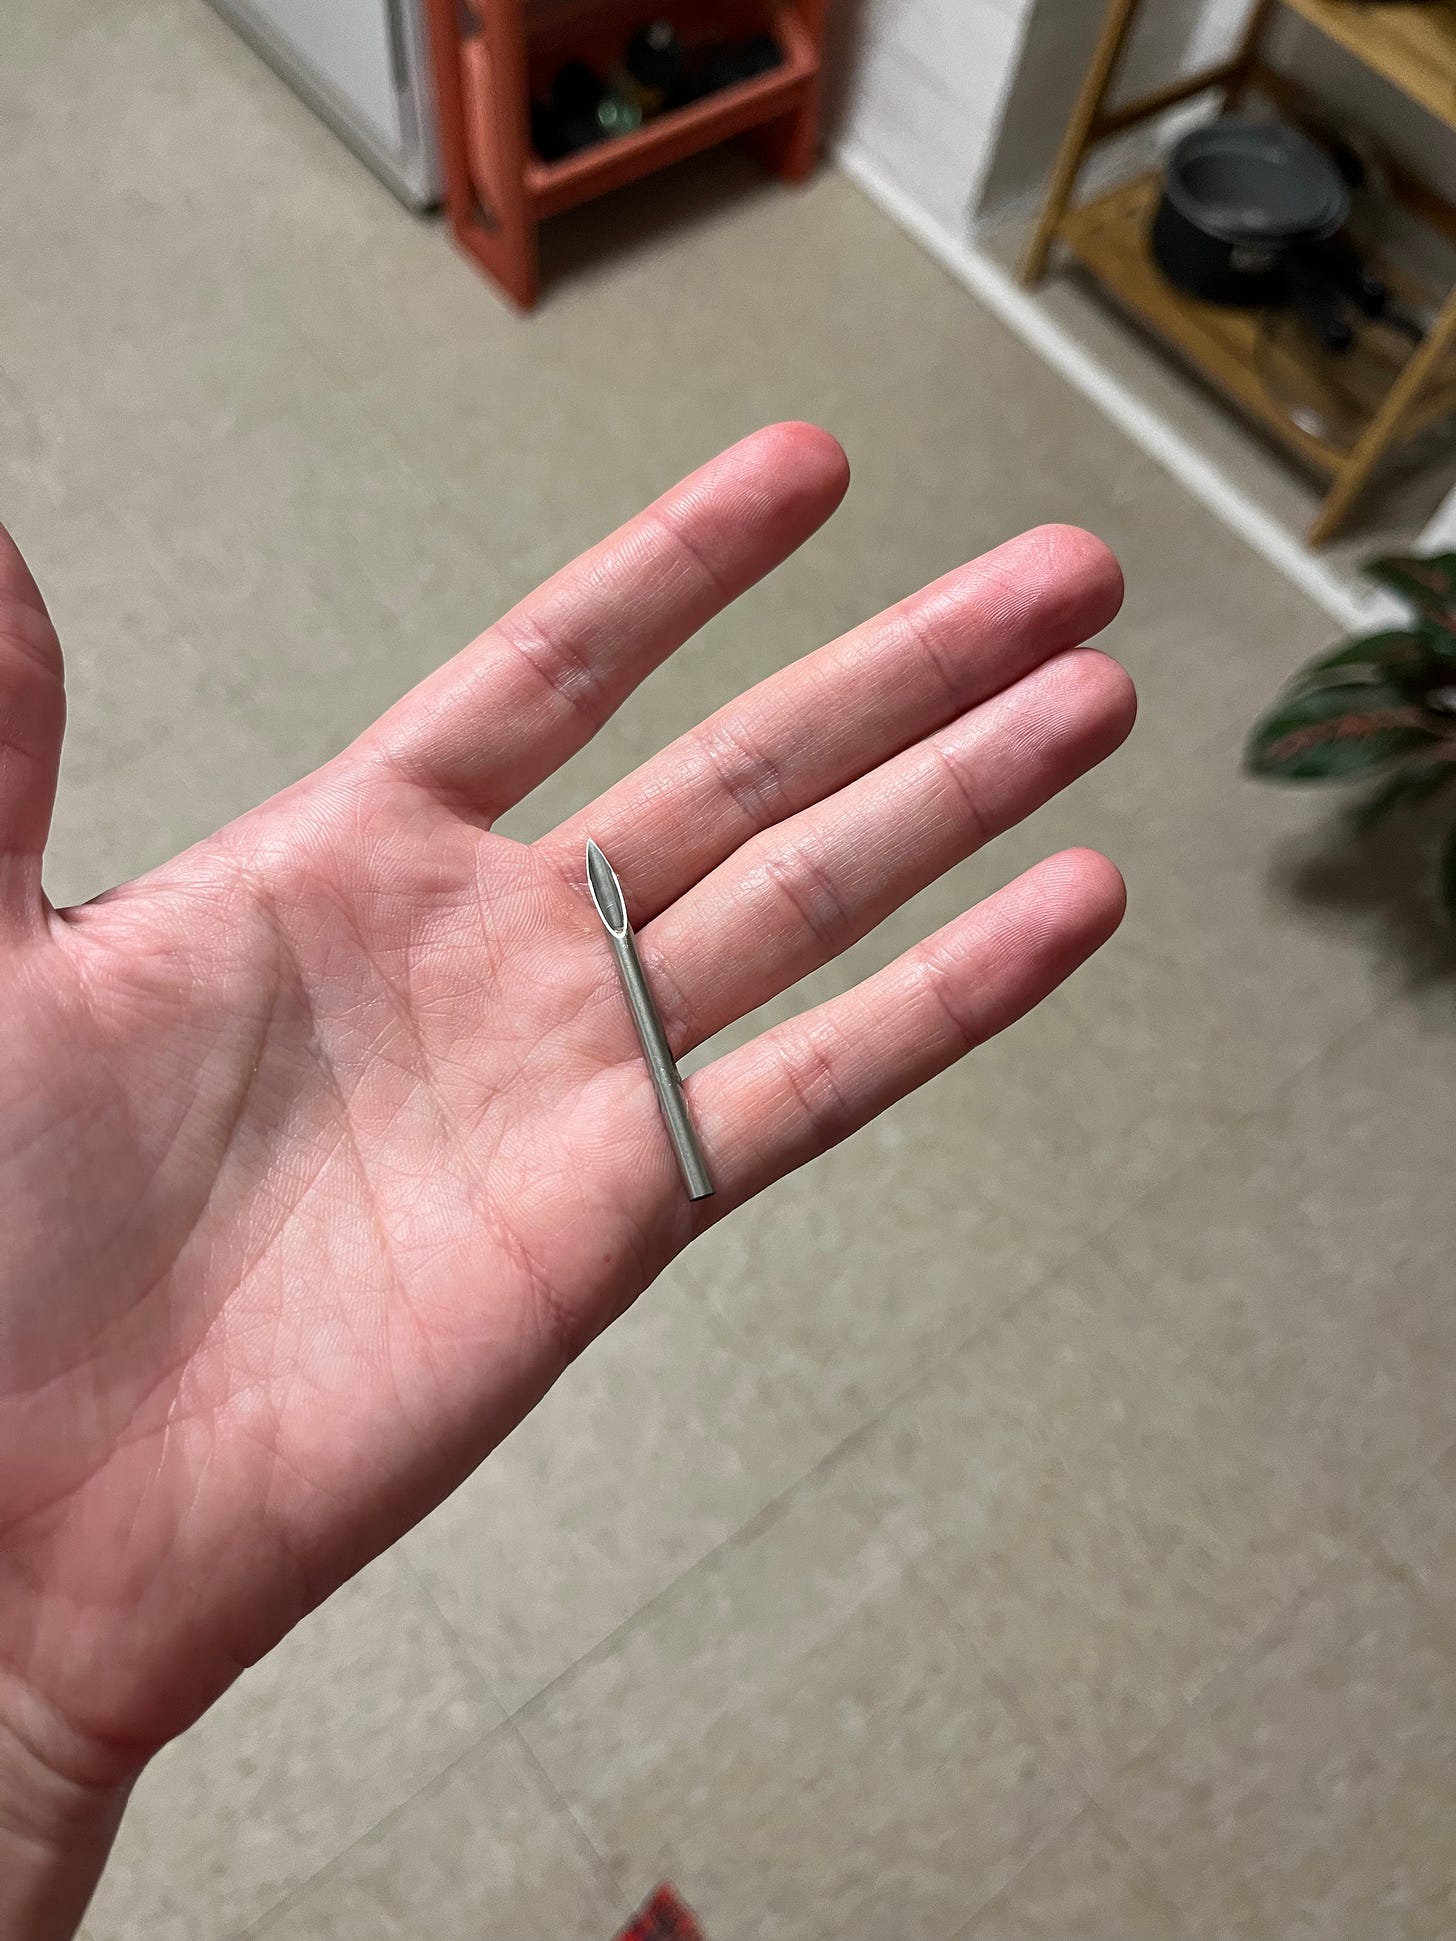 An 8-gauge needle in my palm